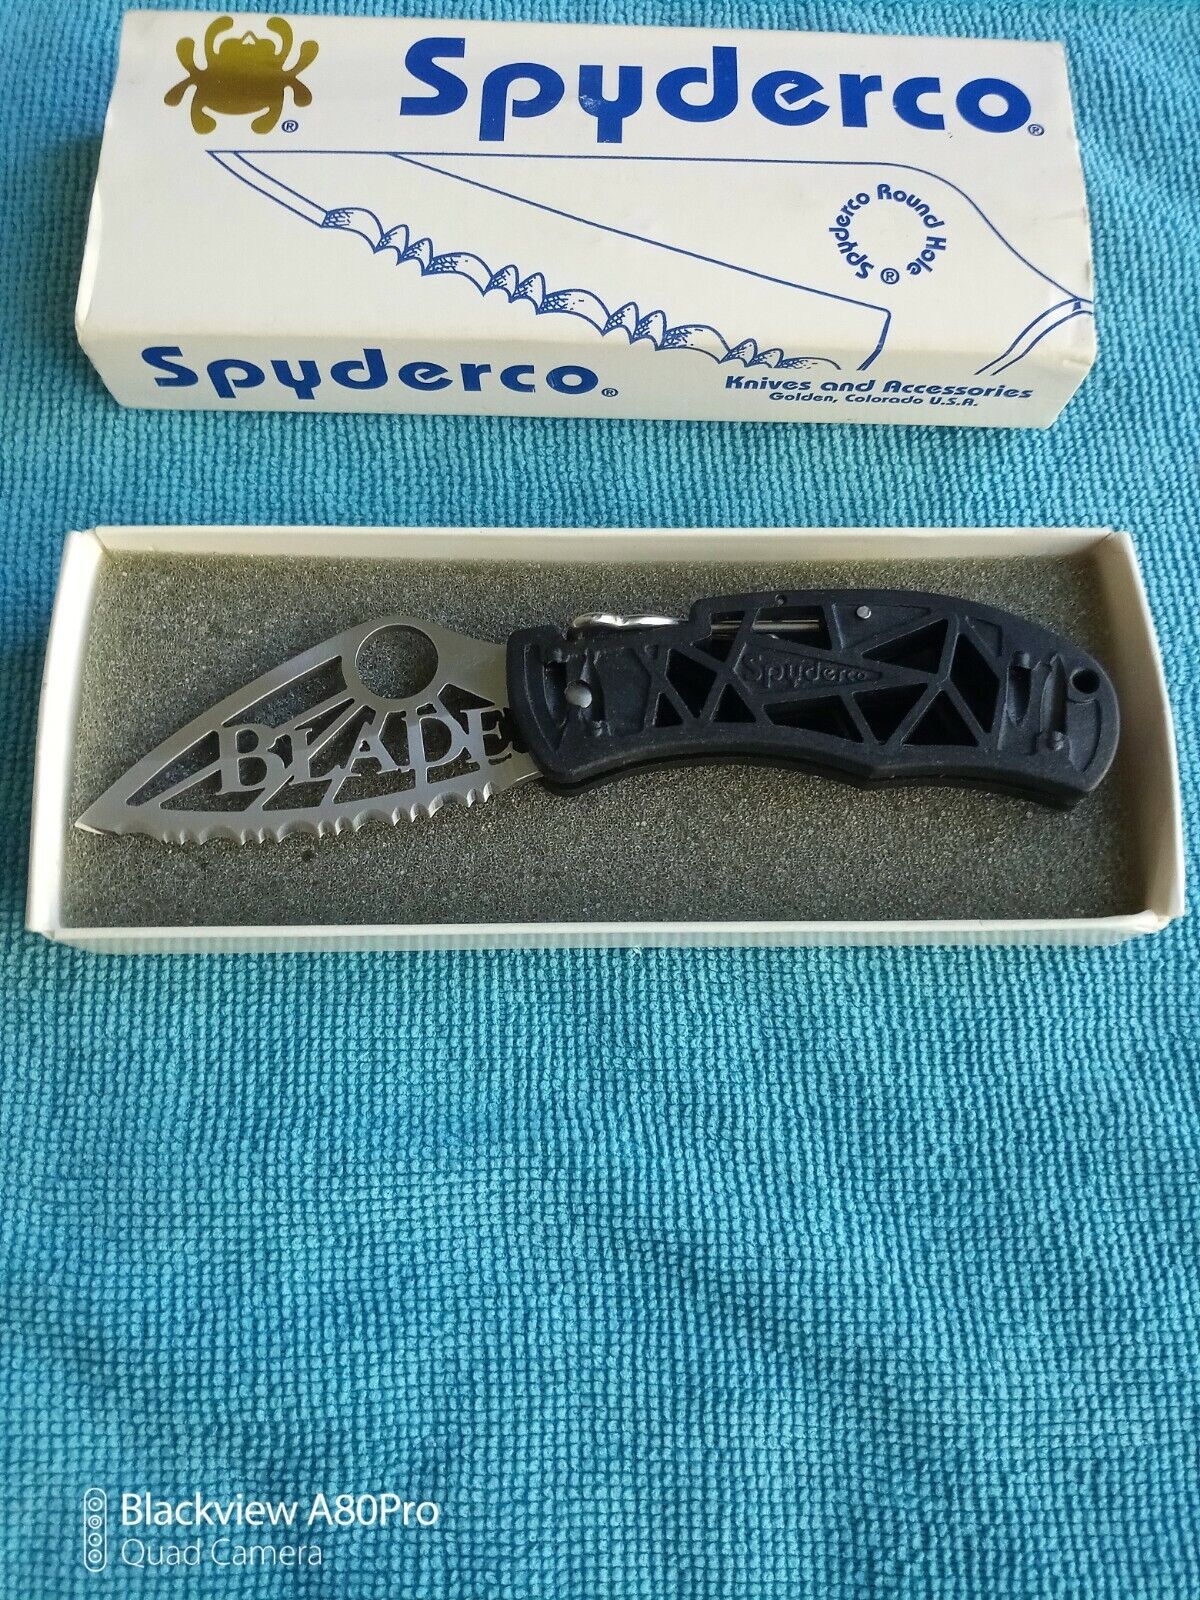 SPYDERCO C35 Q KNIFE WITH SPIDER WEB CUT OUT BLADE LOGO ULTRA RARE